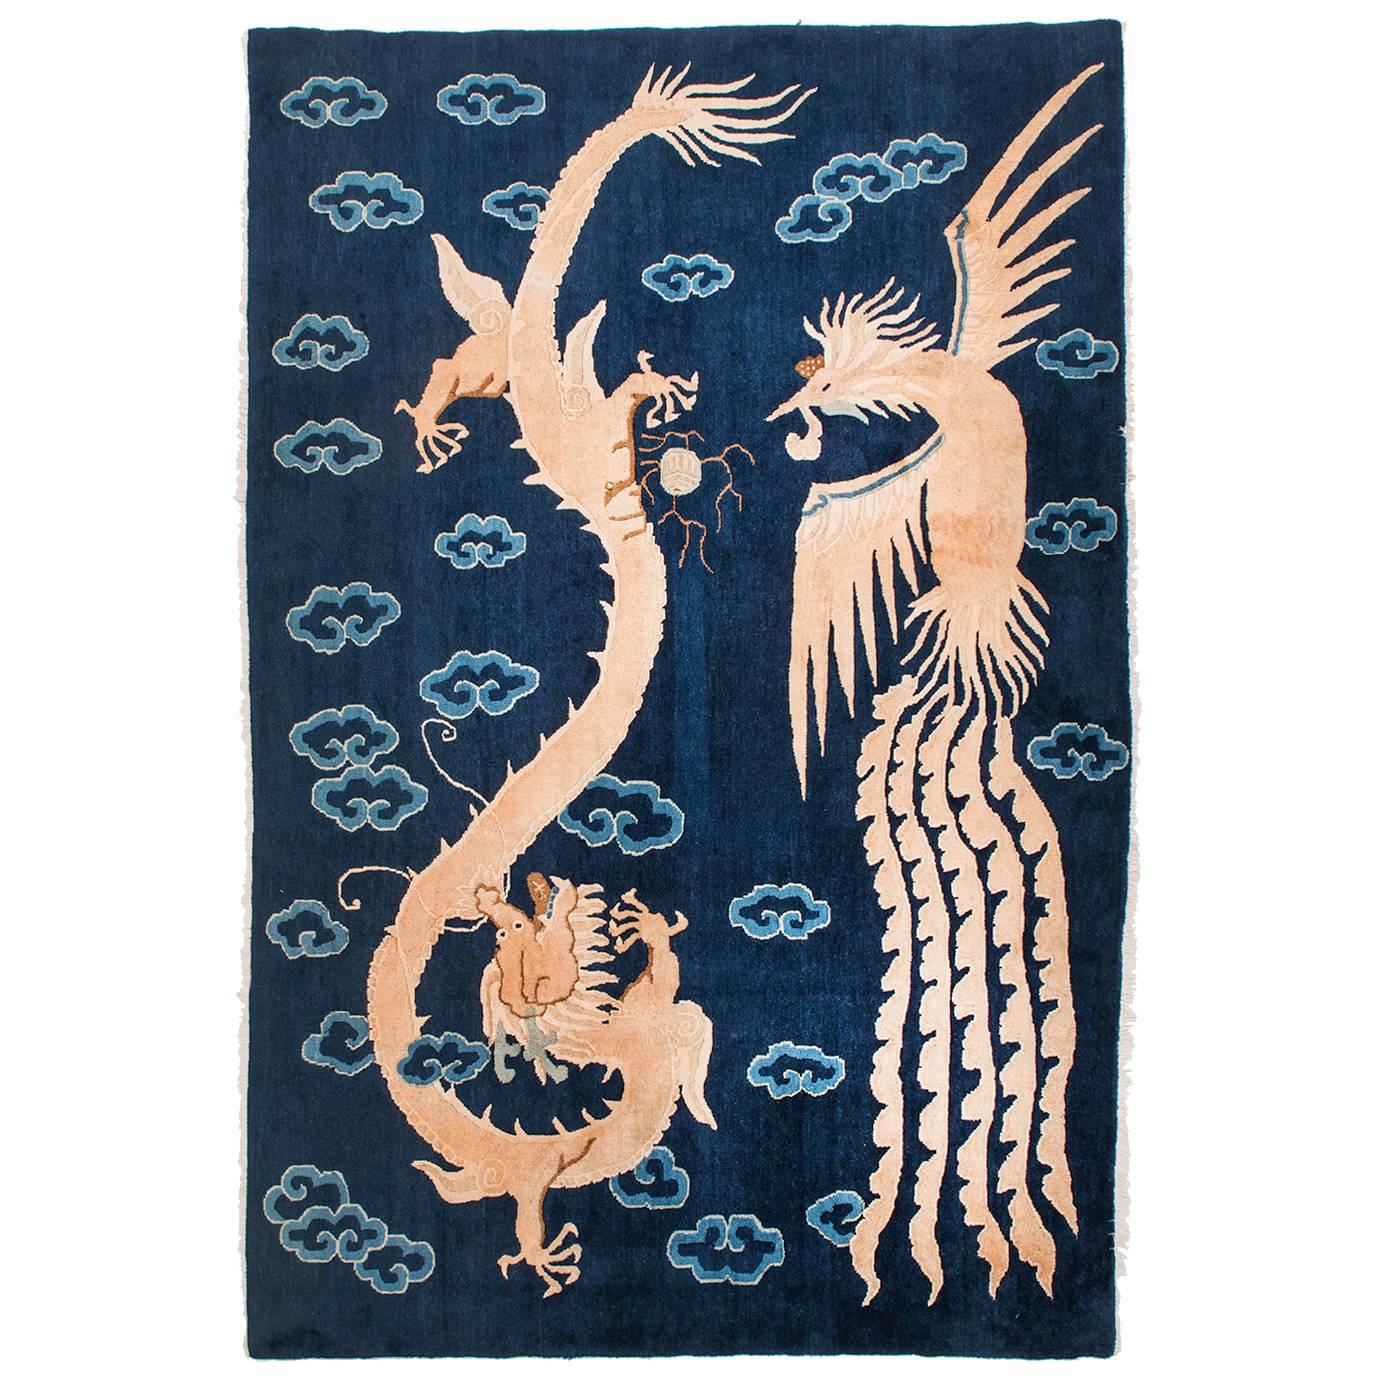 Magic Chinese Carpet with Dragon and Phoenix, from Private Collection